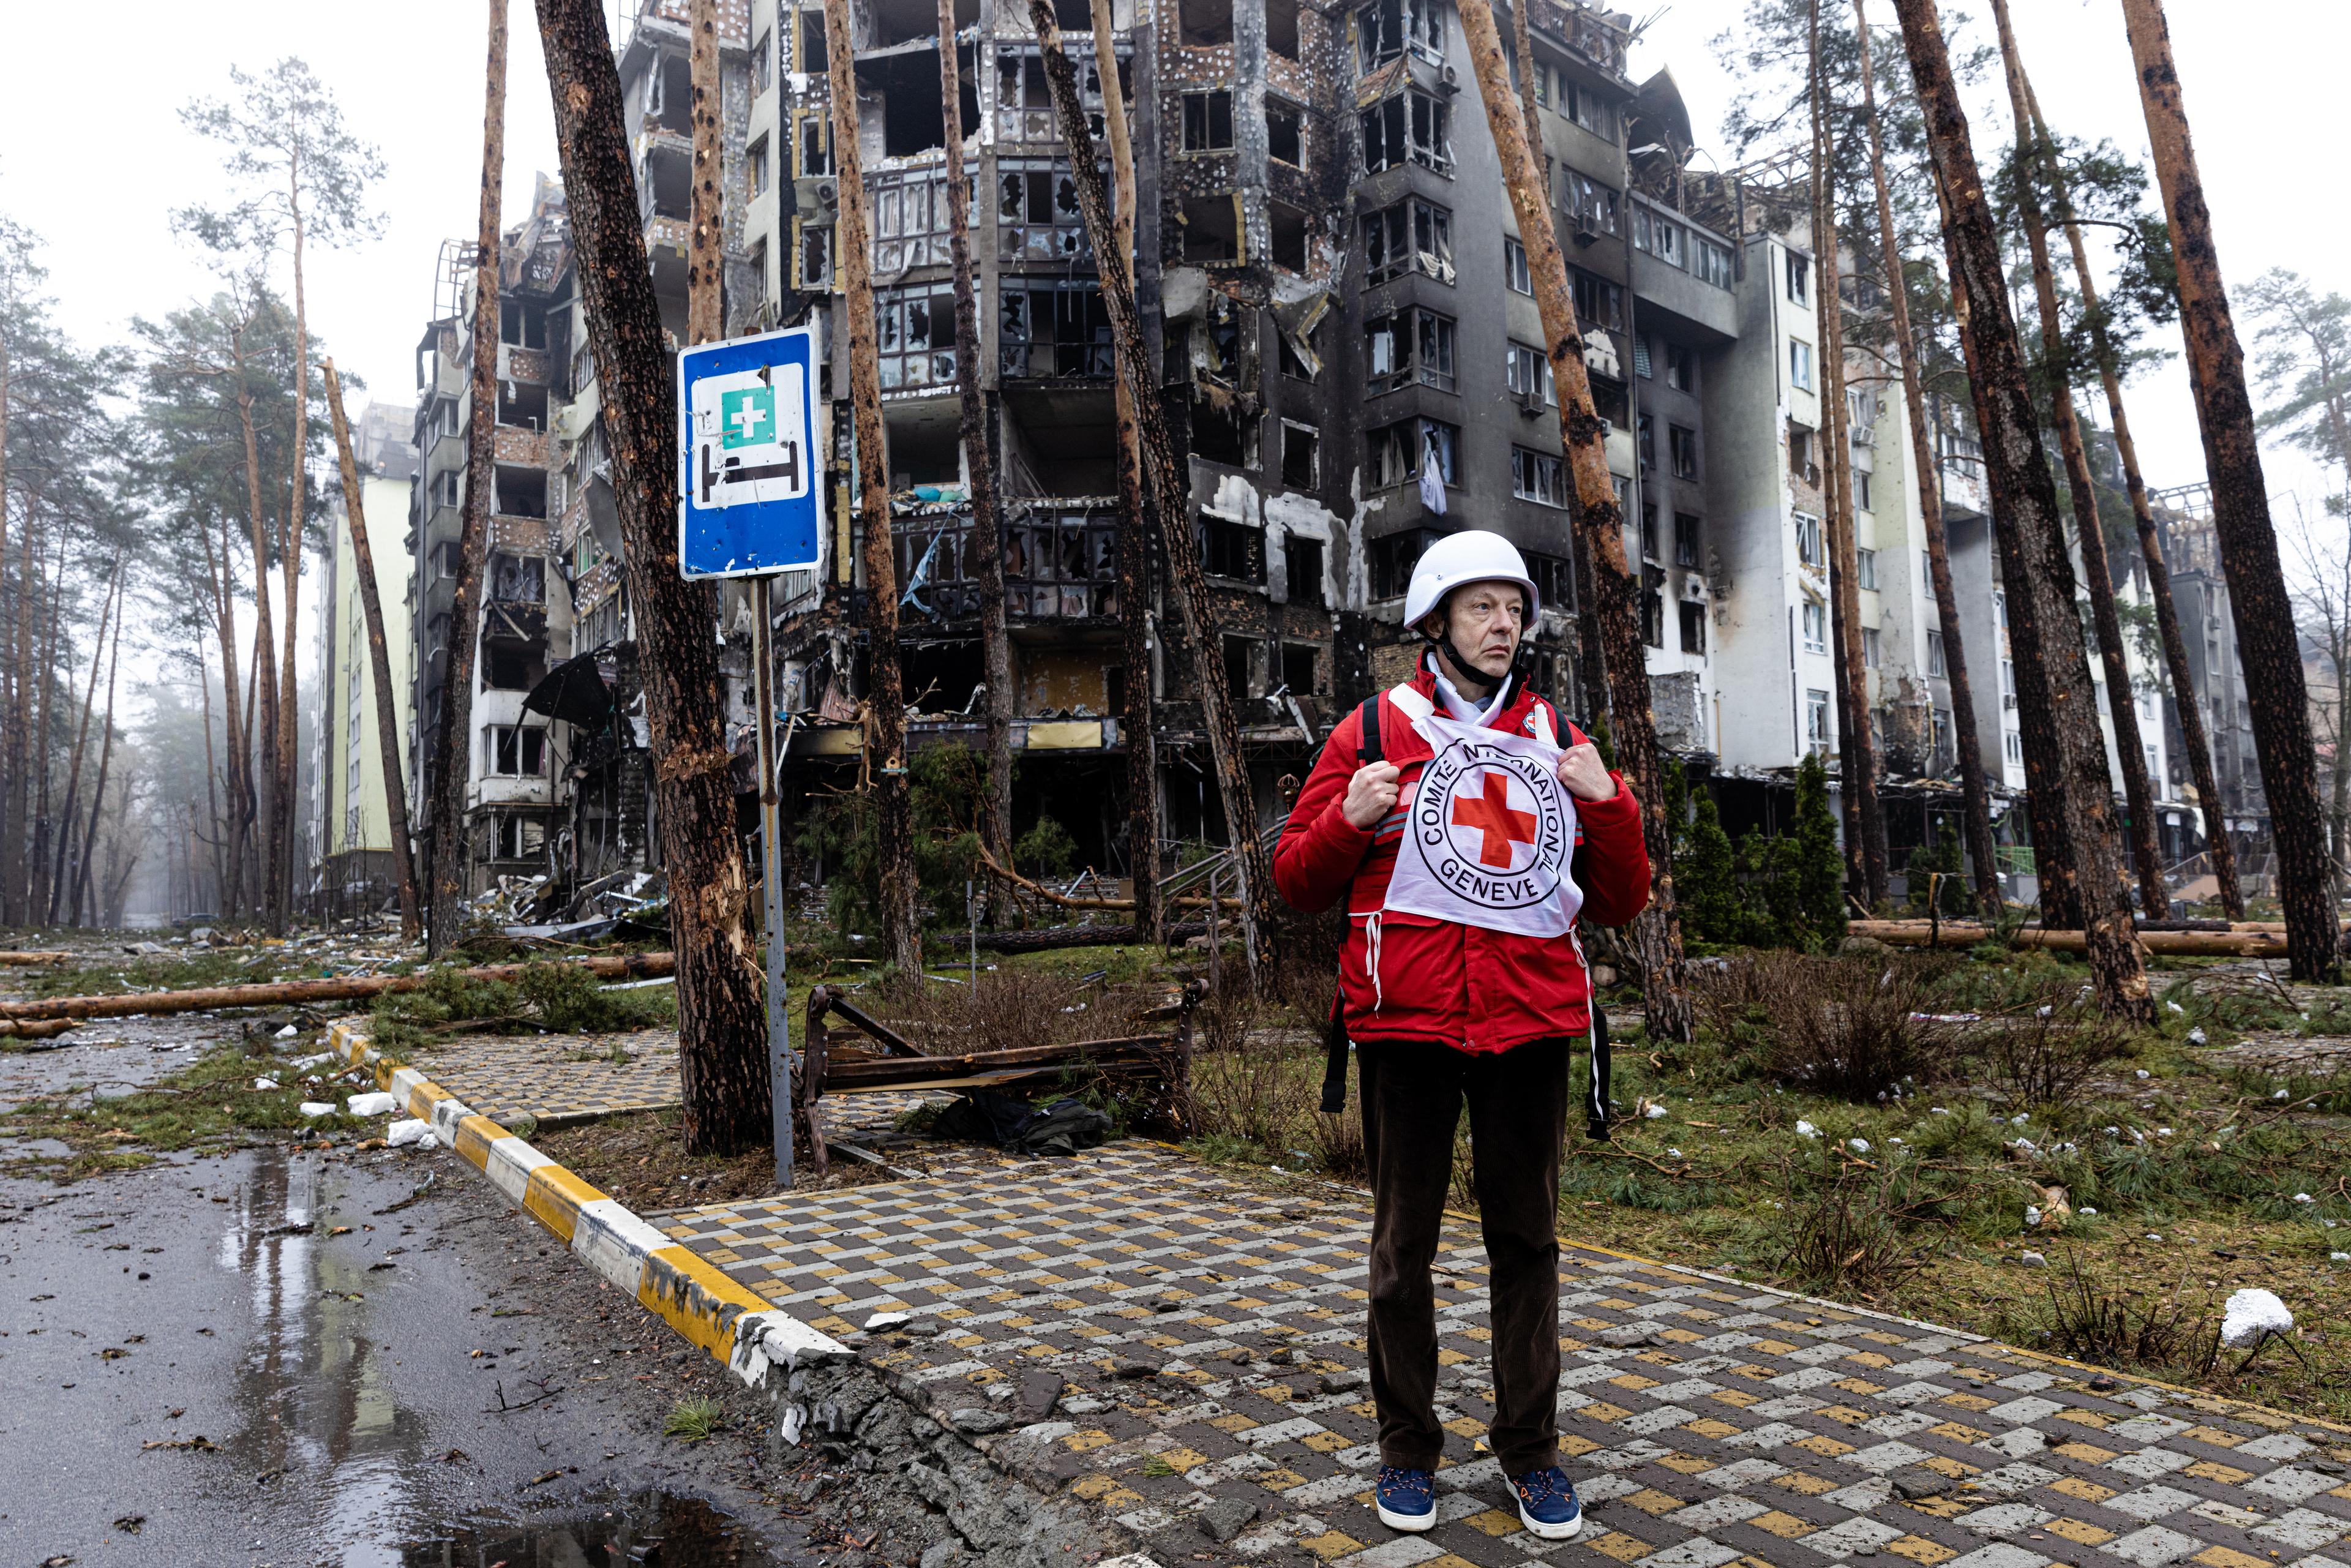 On Friday (1 April 2022), the International Committee of the Red Cross (ICRC) managed to visit Irpin, which normally has a population of around 60,000 people, to help the thousands of people still trapped. They are the homeless, the elderly or those with limited mobility.